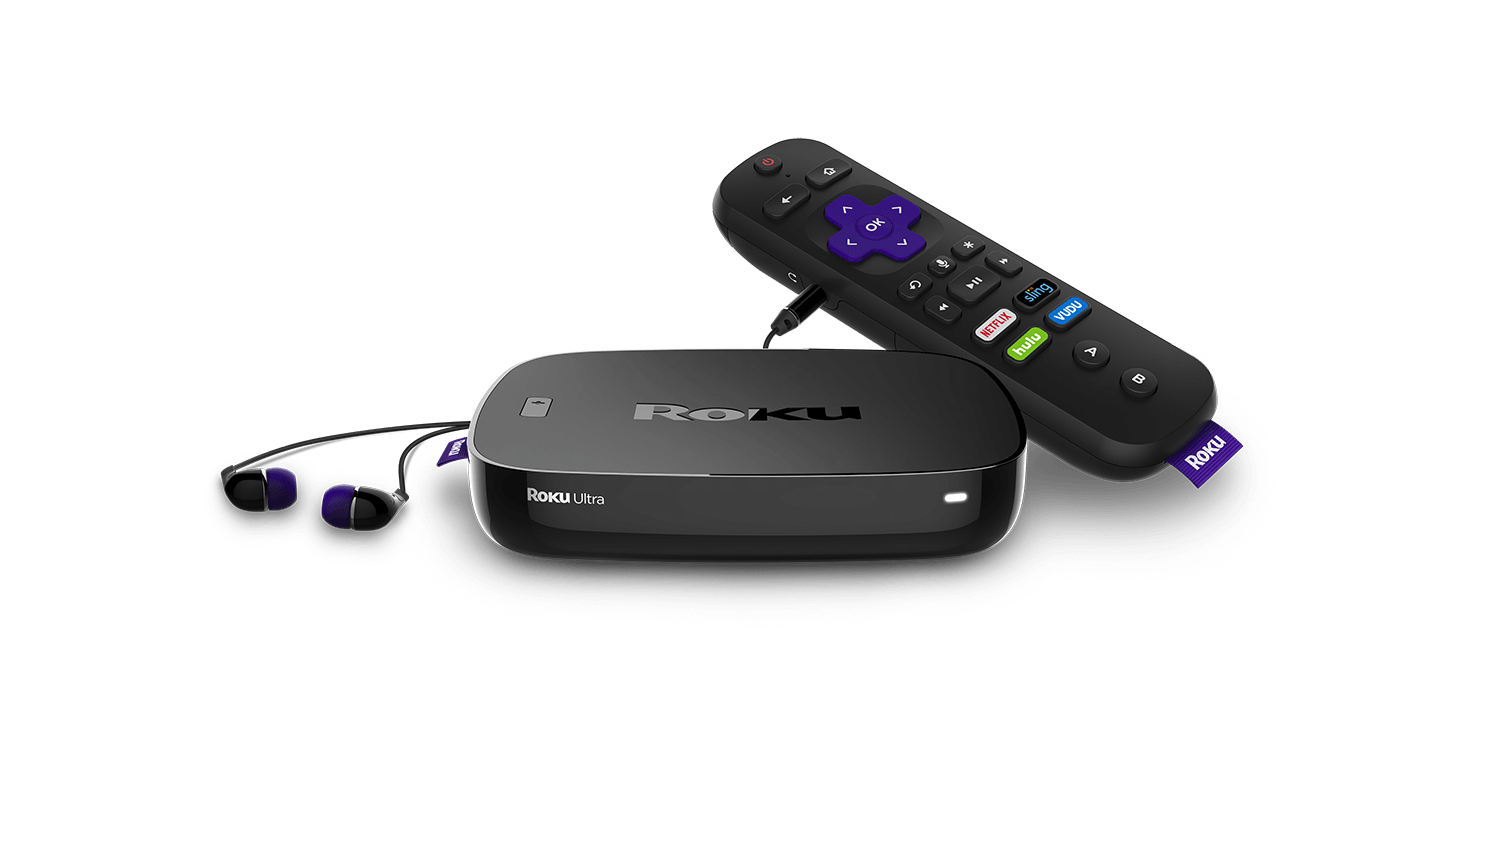 Roku Ultra 4K HDR Streaming Player with voice remote (2017) - image 1 of 8